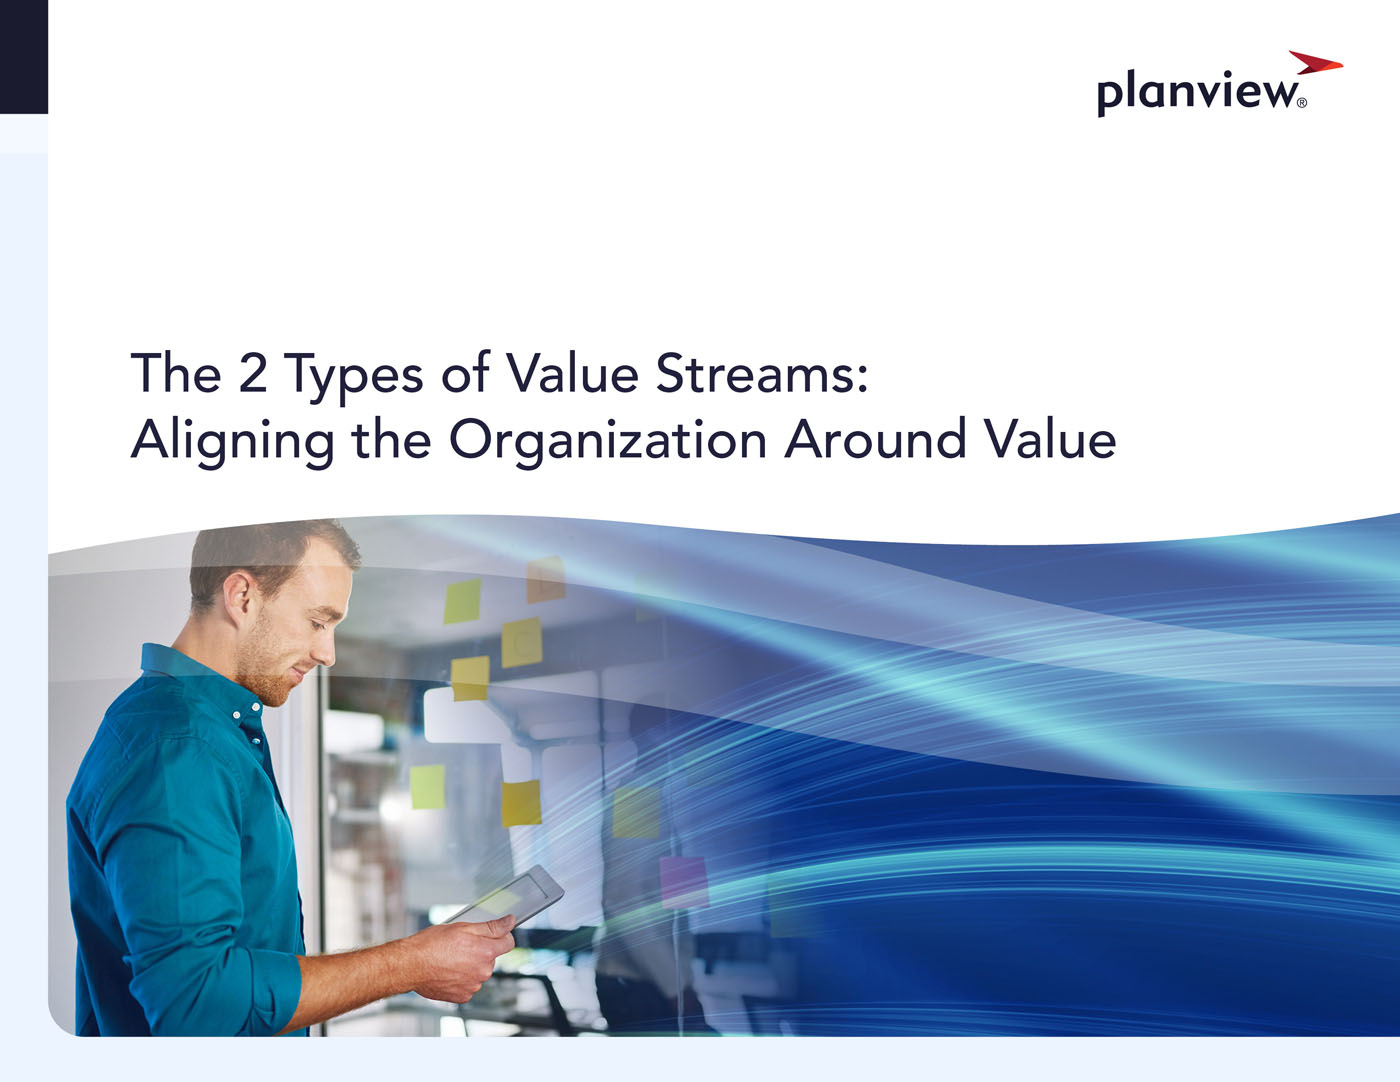 The 2 Types of Value Streams